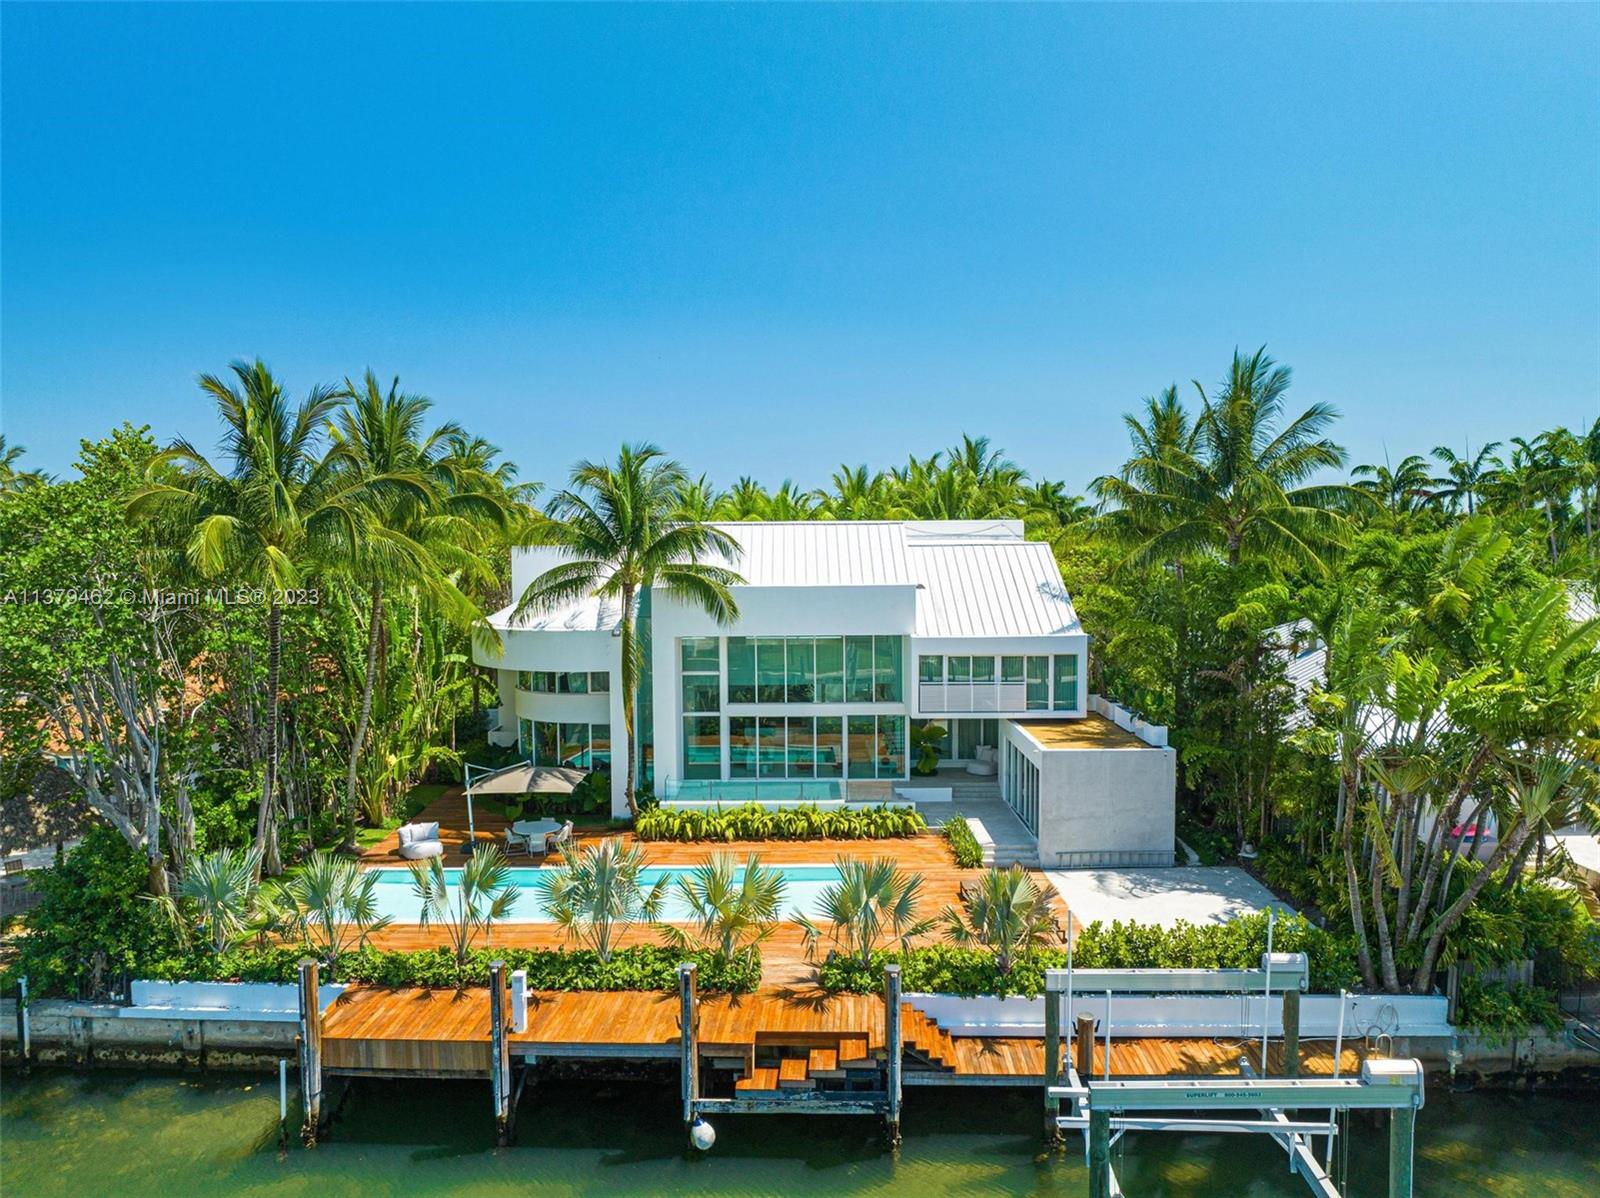 Experience luxury living at its finest in this stunning Key Biscayne waterfront home. Recently renovated to the highest standard, no expense was spared in creating this masterpiece w/ brand new bedrooms, bathrooms, flooring, plumbing, electrical, outdoor deck, kitchen & appliances. The spacious & contemporary design seamlessly connects indoor/outdoor living, providing a serene, private oasis w/ breathtaking views of the canal. Enjoy the natural light streaming through the high ceilings & floor-to-ceiling sliding glass doors. The custom lighting design adds a touch of sophistication to this exquisite home. W/ a master chef industrial kitchen, 4 ample en-suite bedrooms, gym (can be converted to a 5th bdrm), gorgeous office/den, powder room, cabana bath & boat lift, this home has it all.